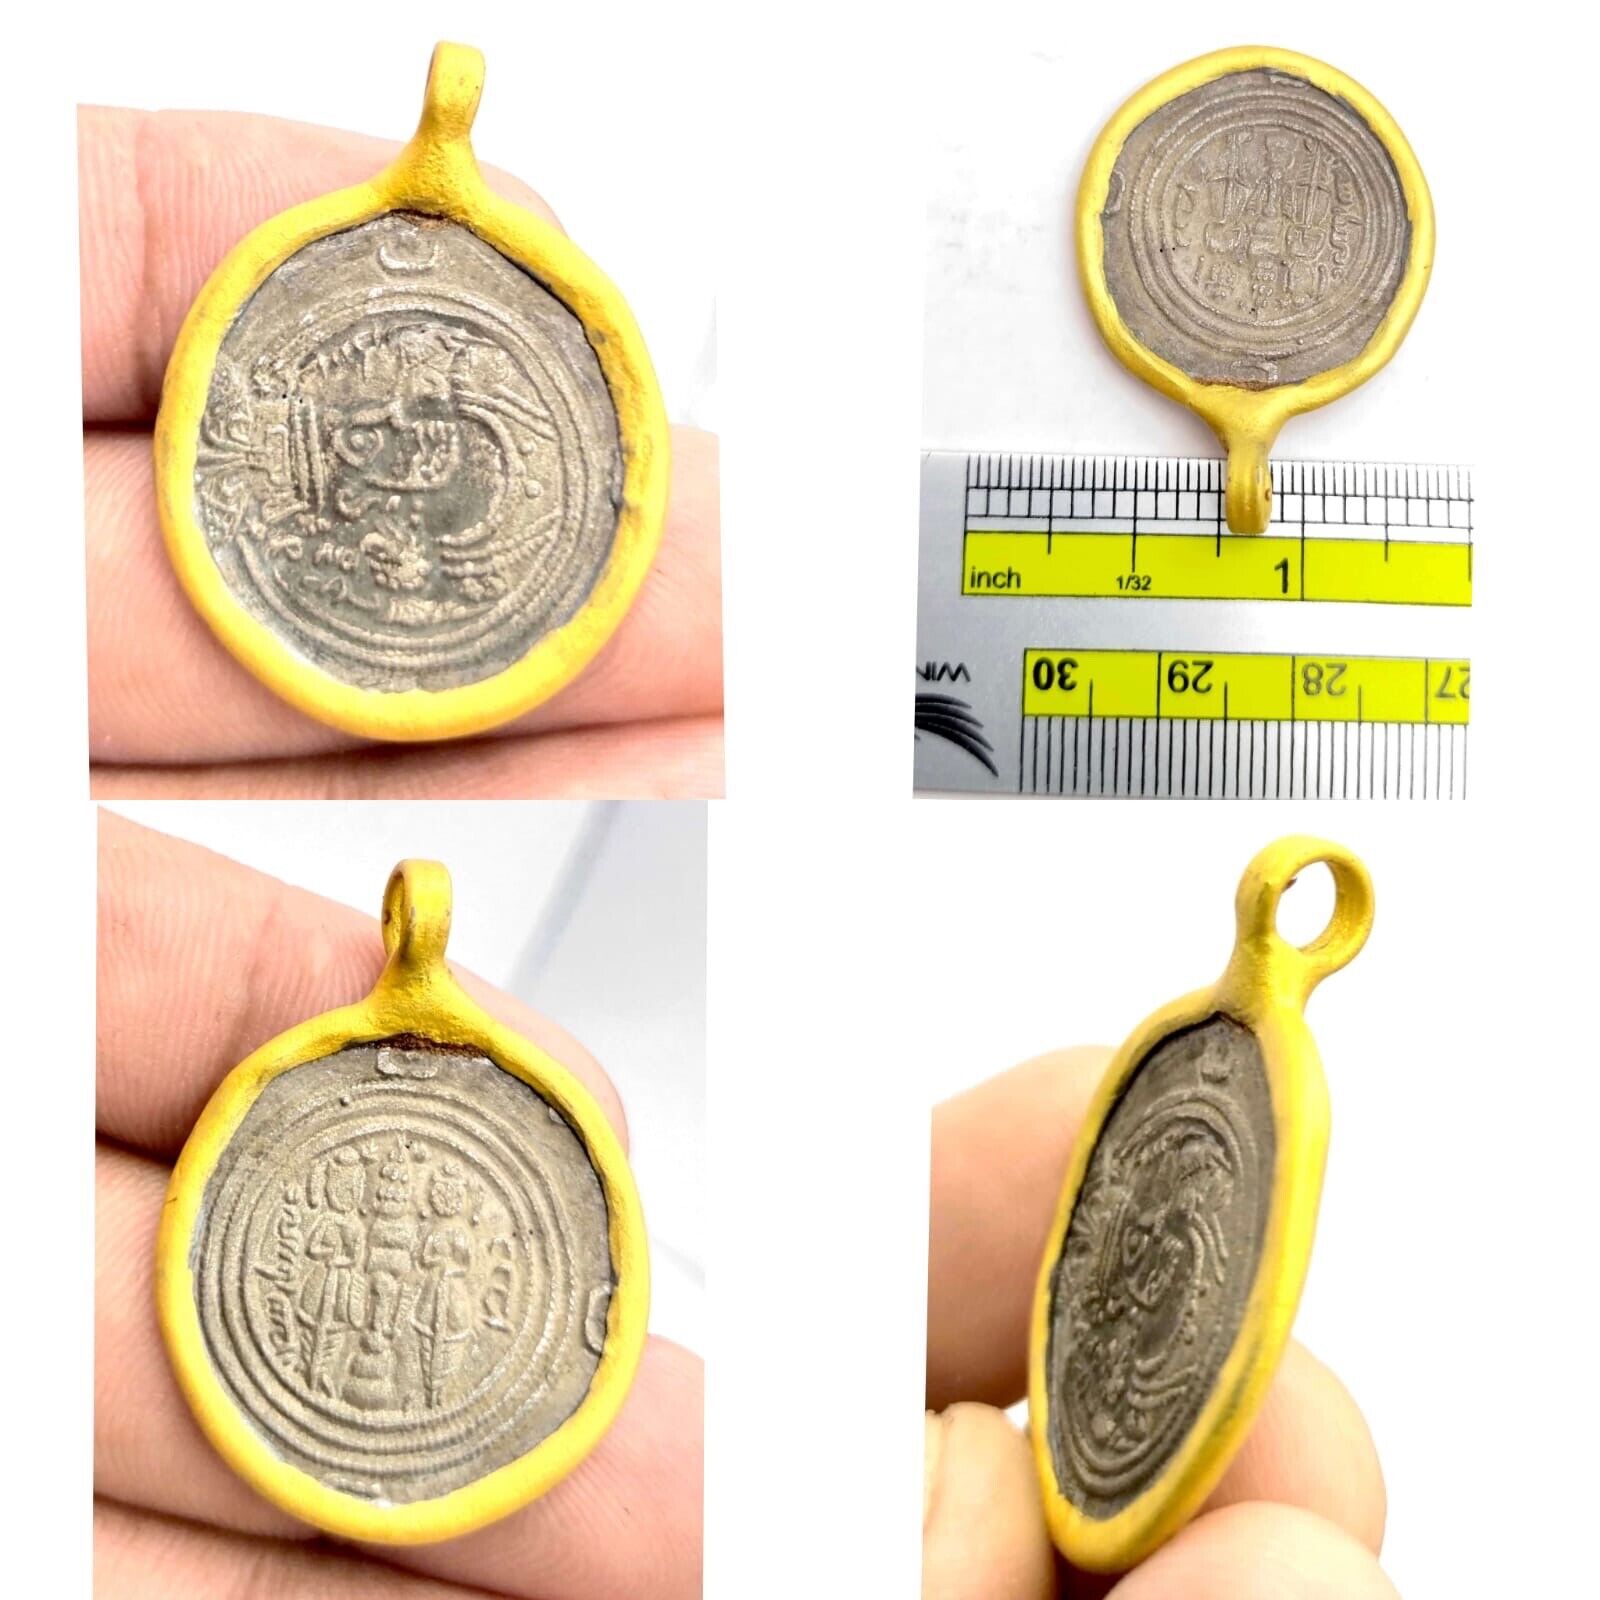 ancient Sassanian silver coin made into a gold plated pendant